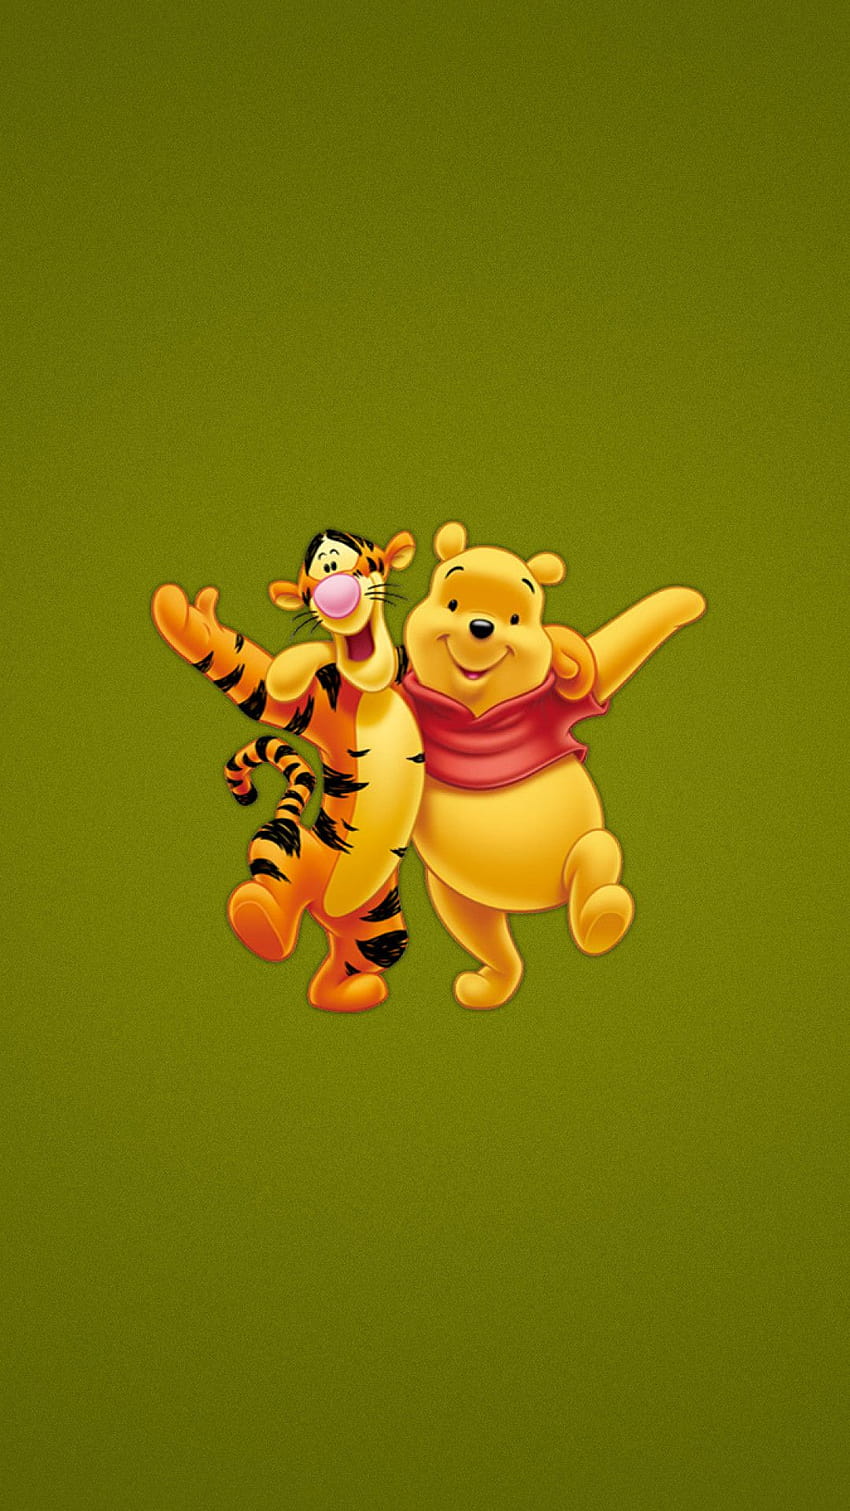 Winnie the Pooh Backgrounds, aesthetic winnie the pooh HD phone wallpaper